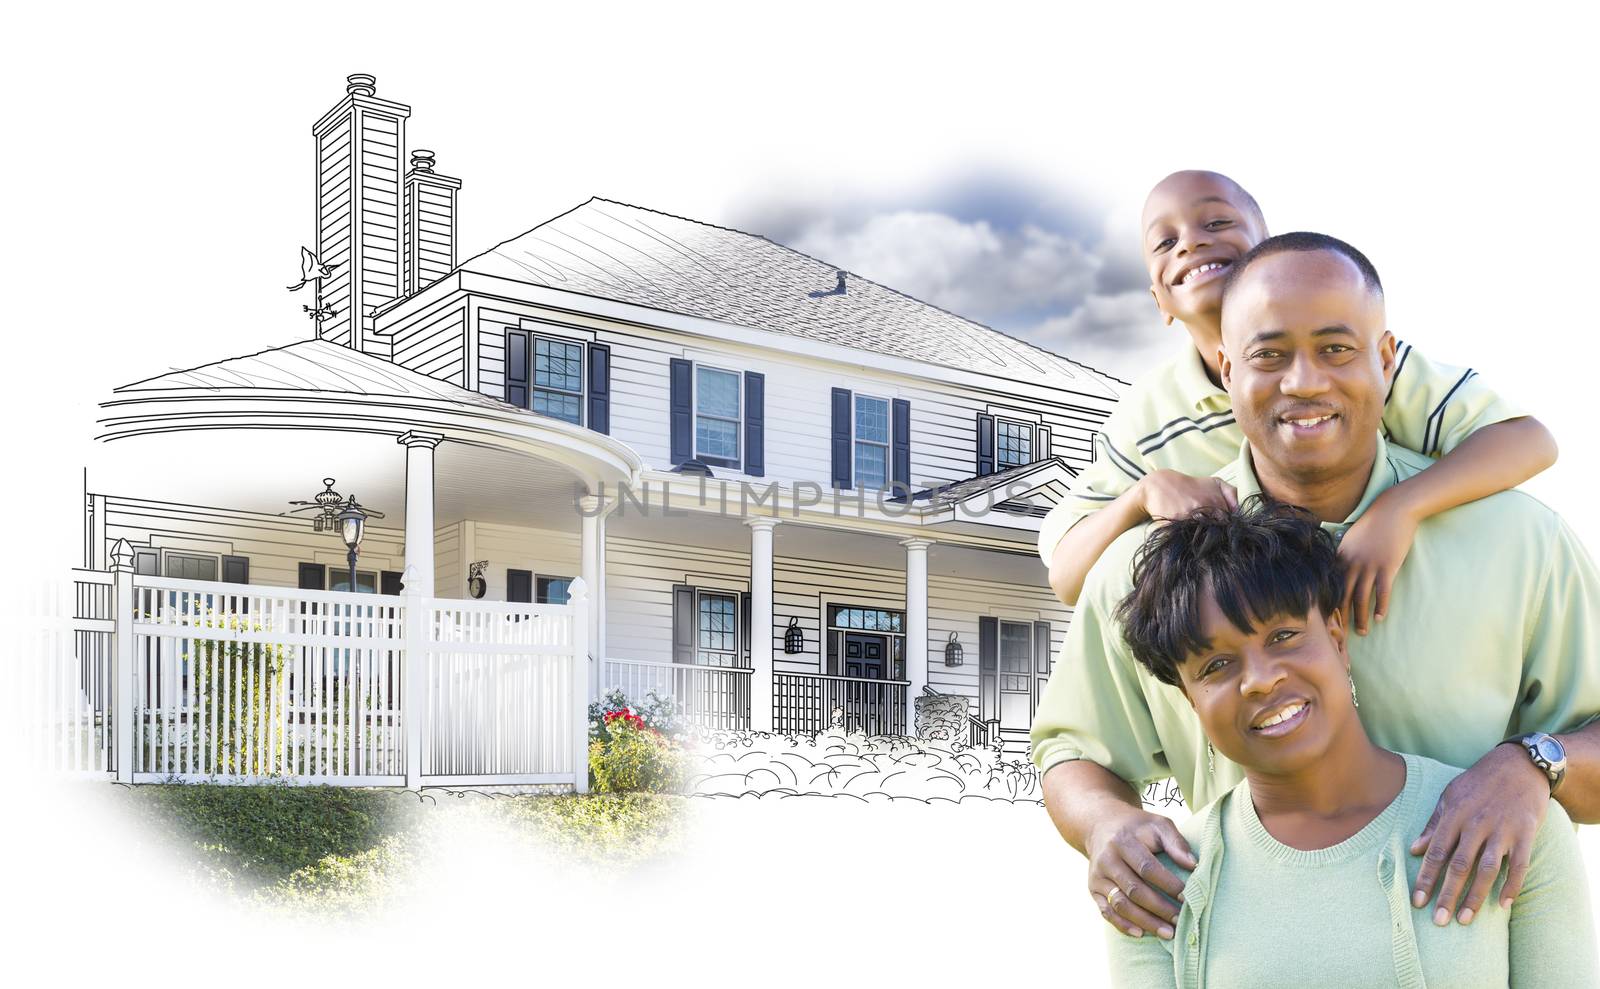 African American Family Over House Drawing and Photo on White by Feverpitched